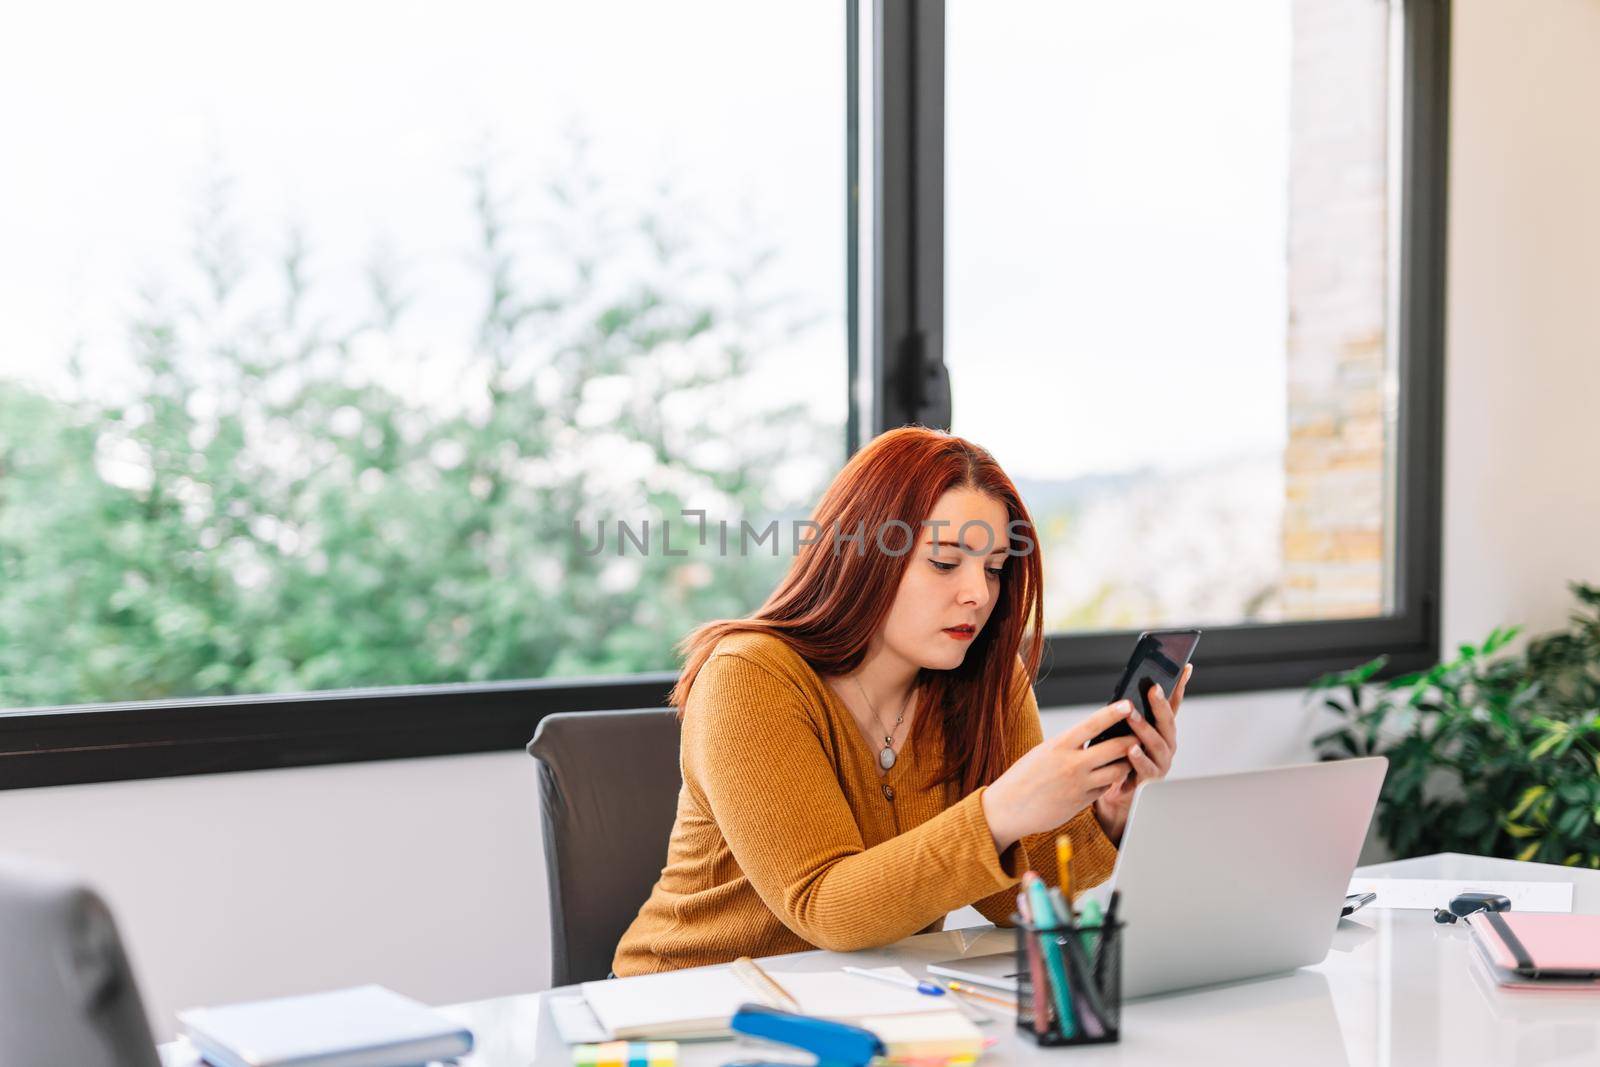 Pretty young red-haired girl in yellow sweater chatting on her smartphone while working on her laptop. Young businesswoman teleworking from home in a very bright environment with a large window in the background and natural light.